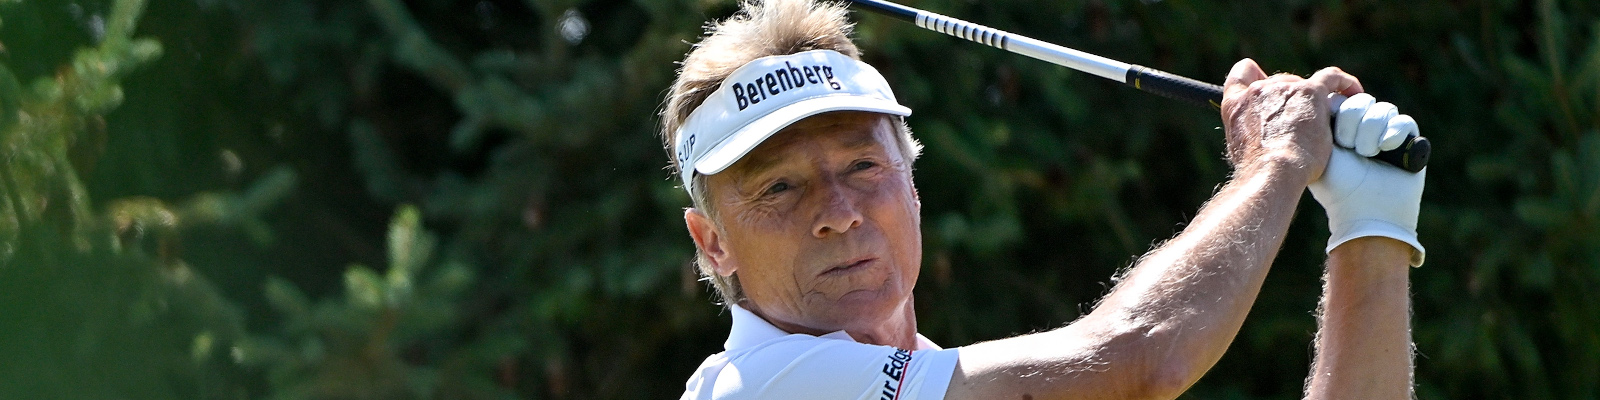 Bernhard Langer (Photo by Jeff Curry/Getty Images)